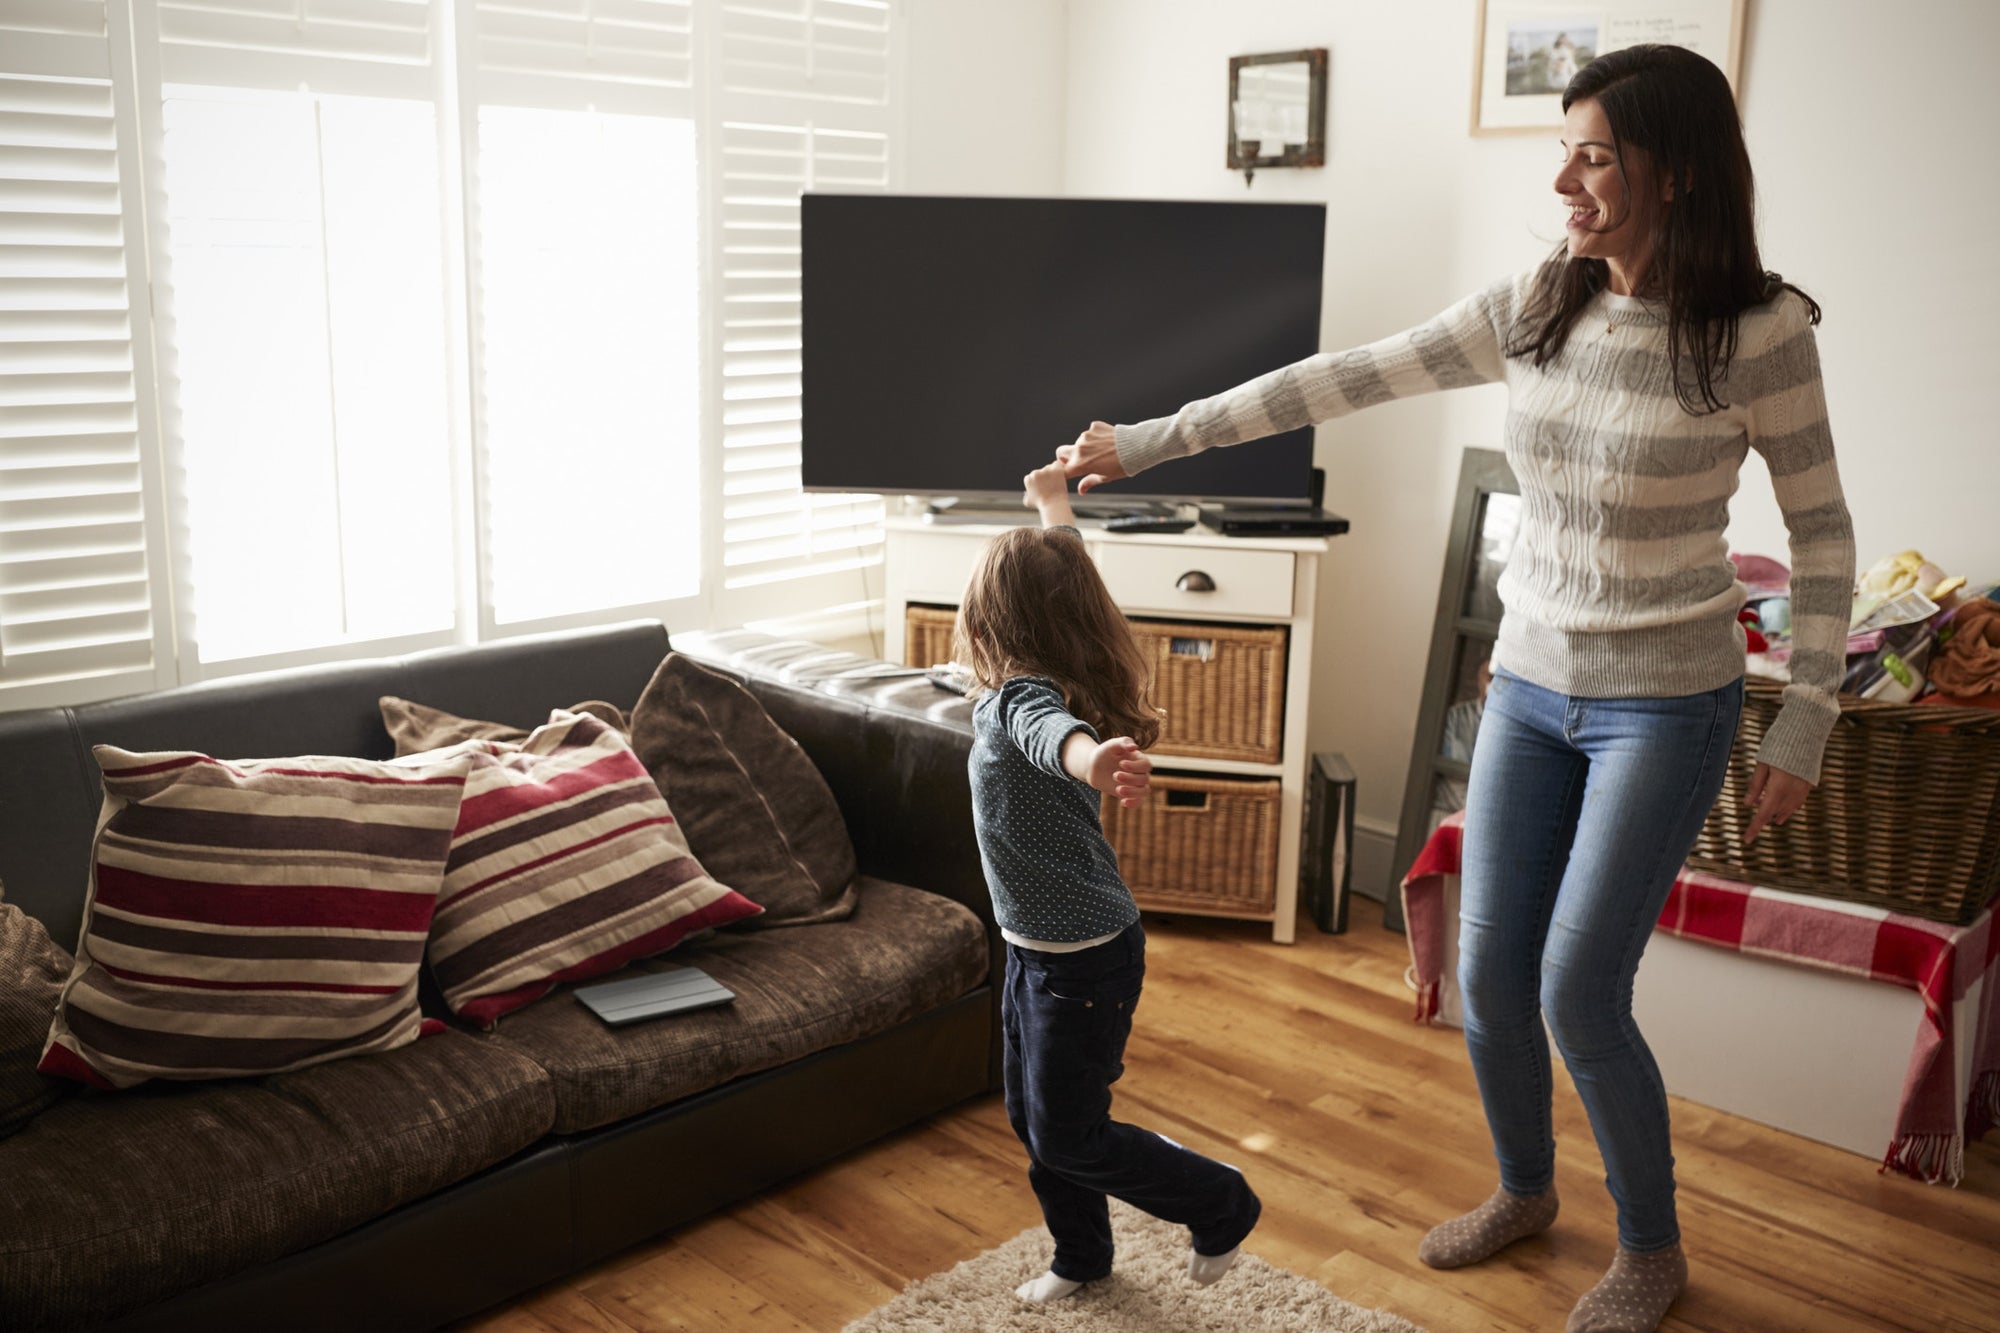 Mother and daughter dancing together in living room